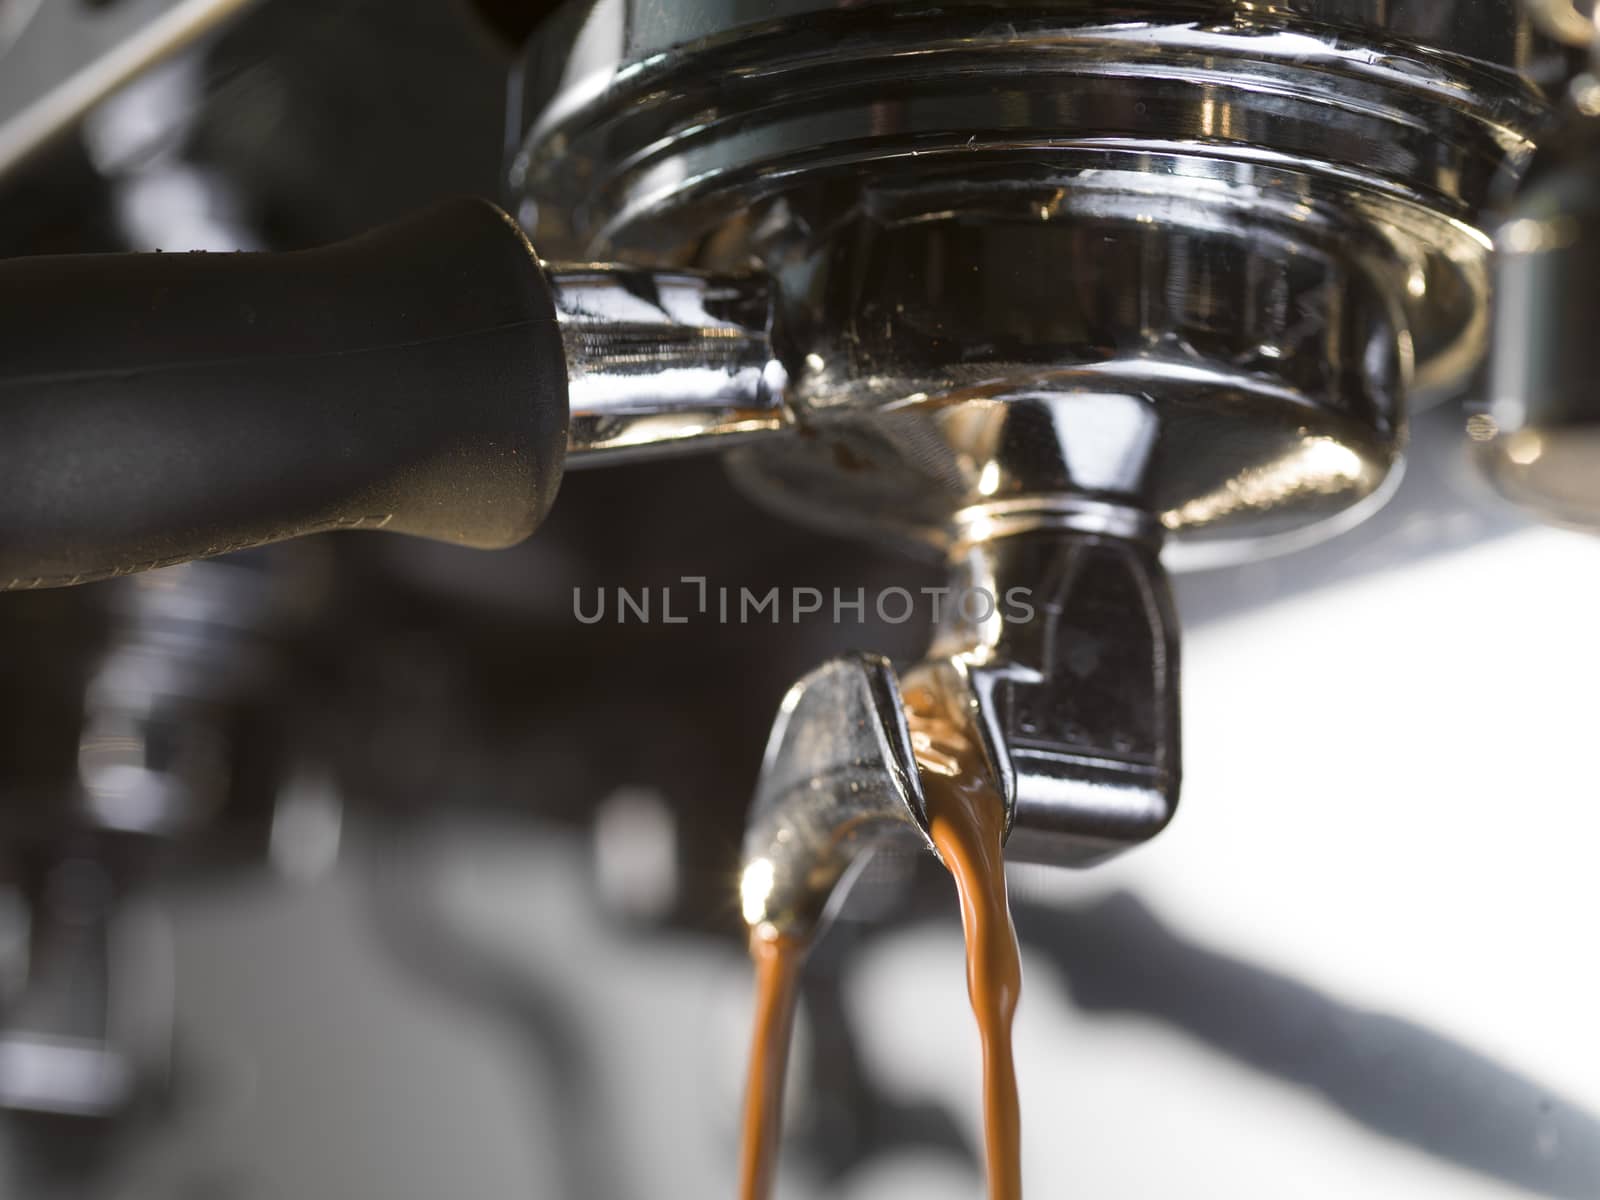 espresso extraction with a proffessional coffee machine, close up by janssenkruseproductions